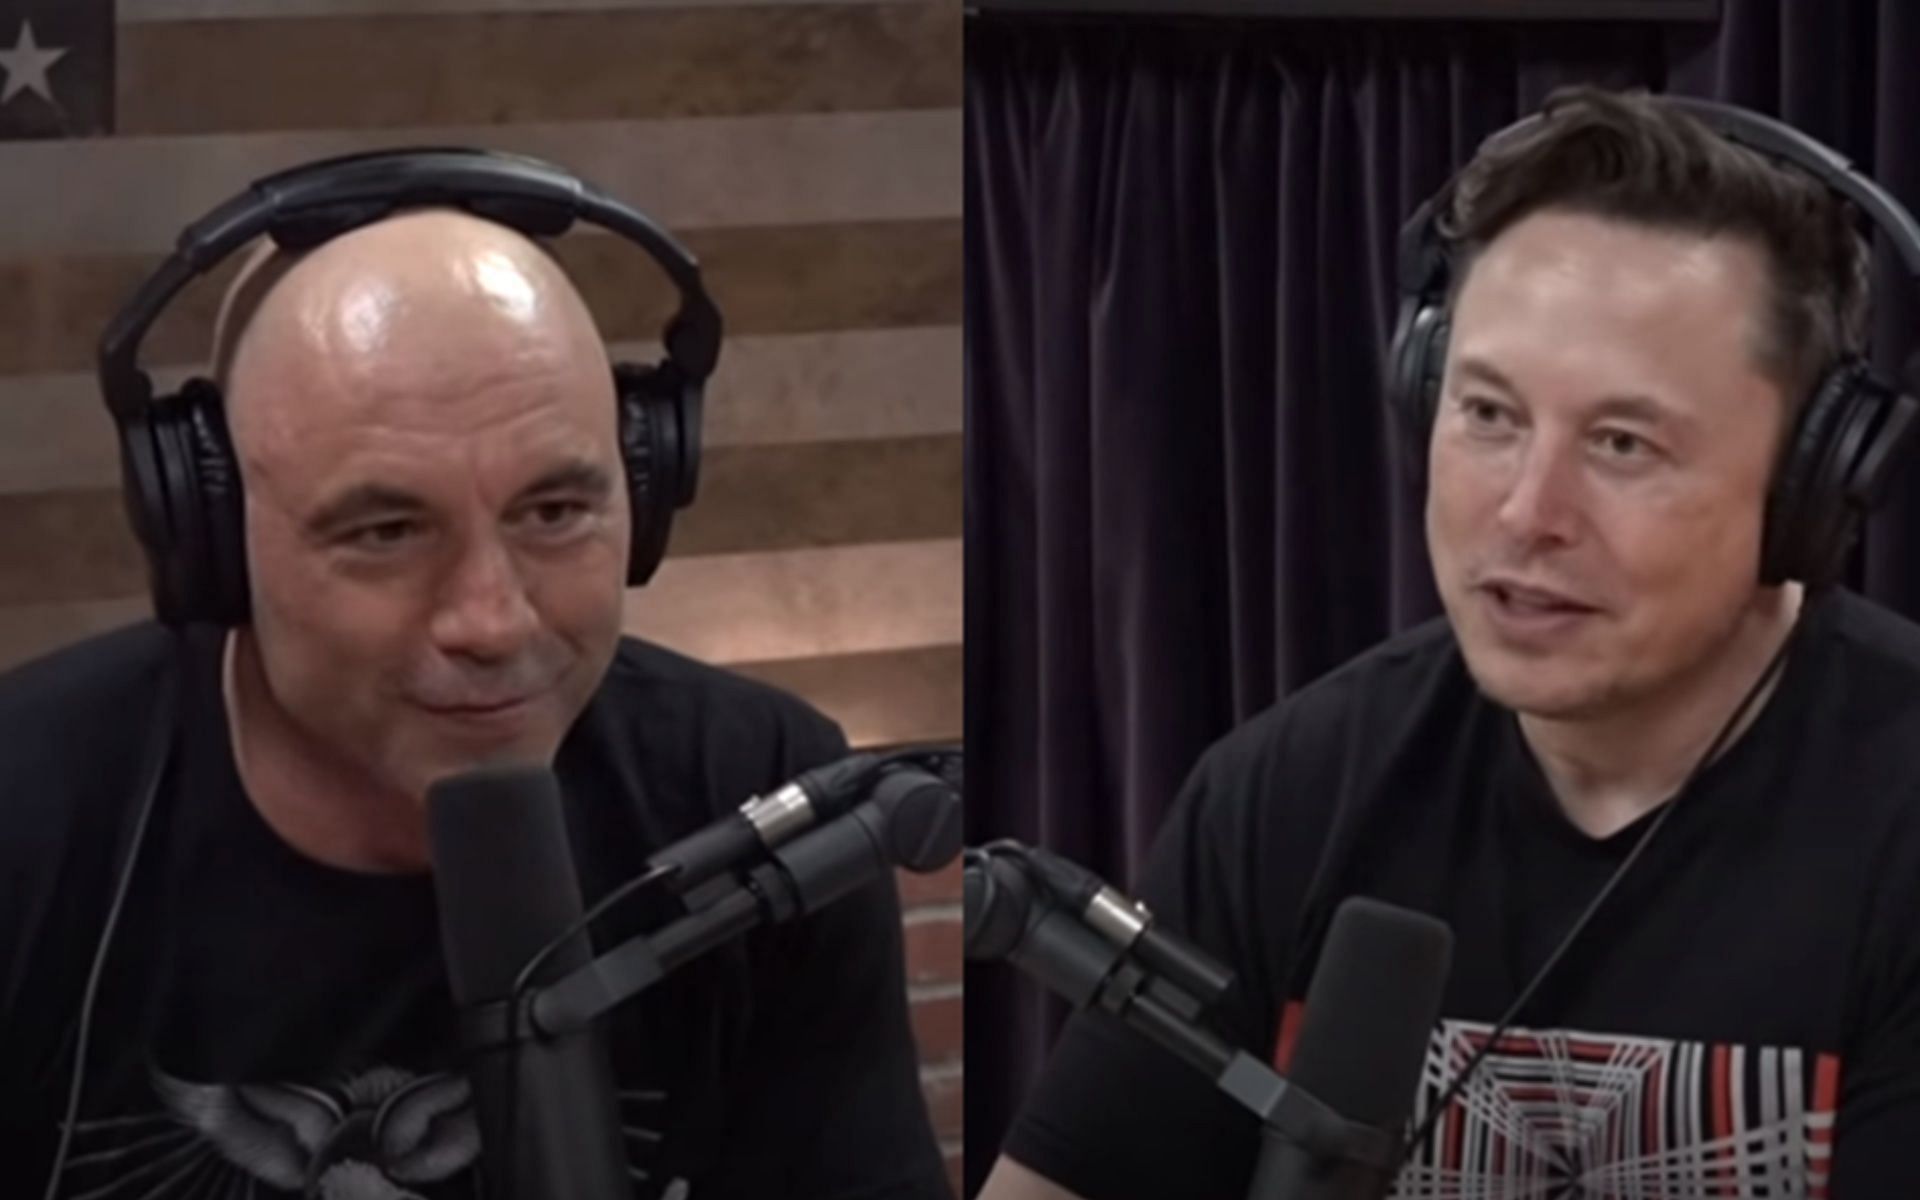 Joe Rogan (L) and Elon Musk (R) have discussed AI often. [Image via JRE YouTube]